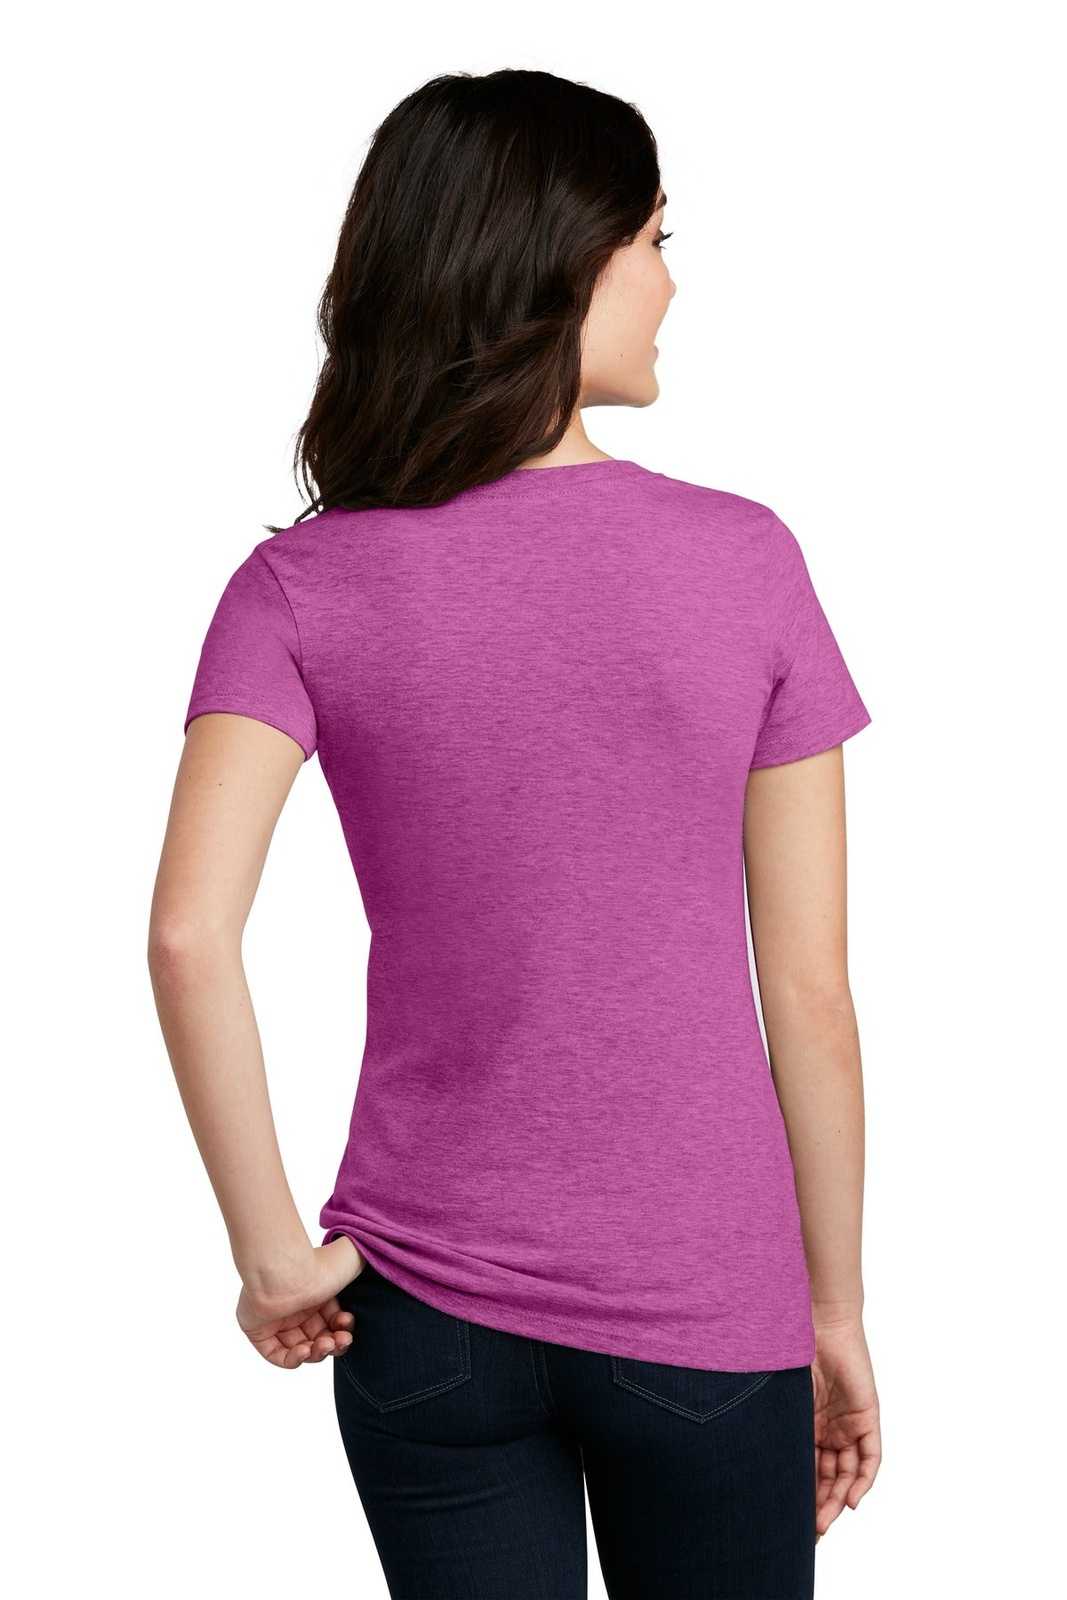 District DM1190L Women's Perfect Blend V-Neck Tee - Heathered Pink Raspberry - HIT a Double - 1